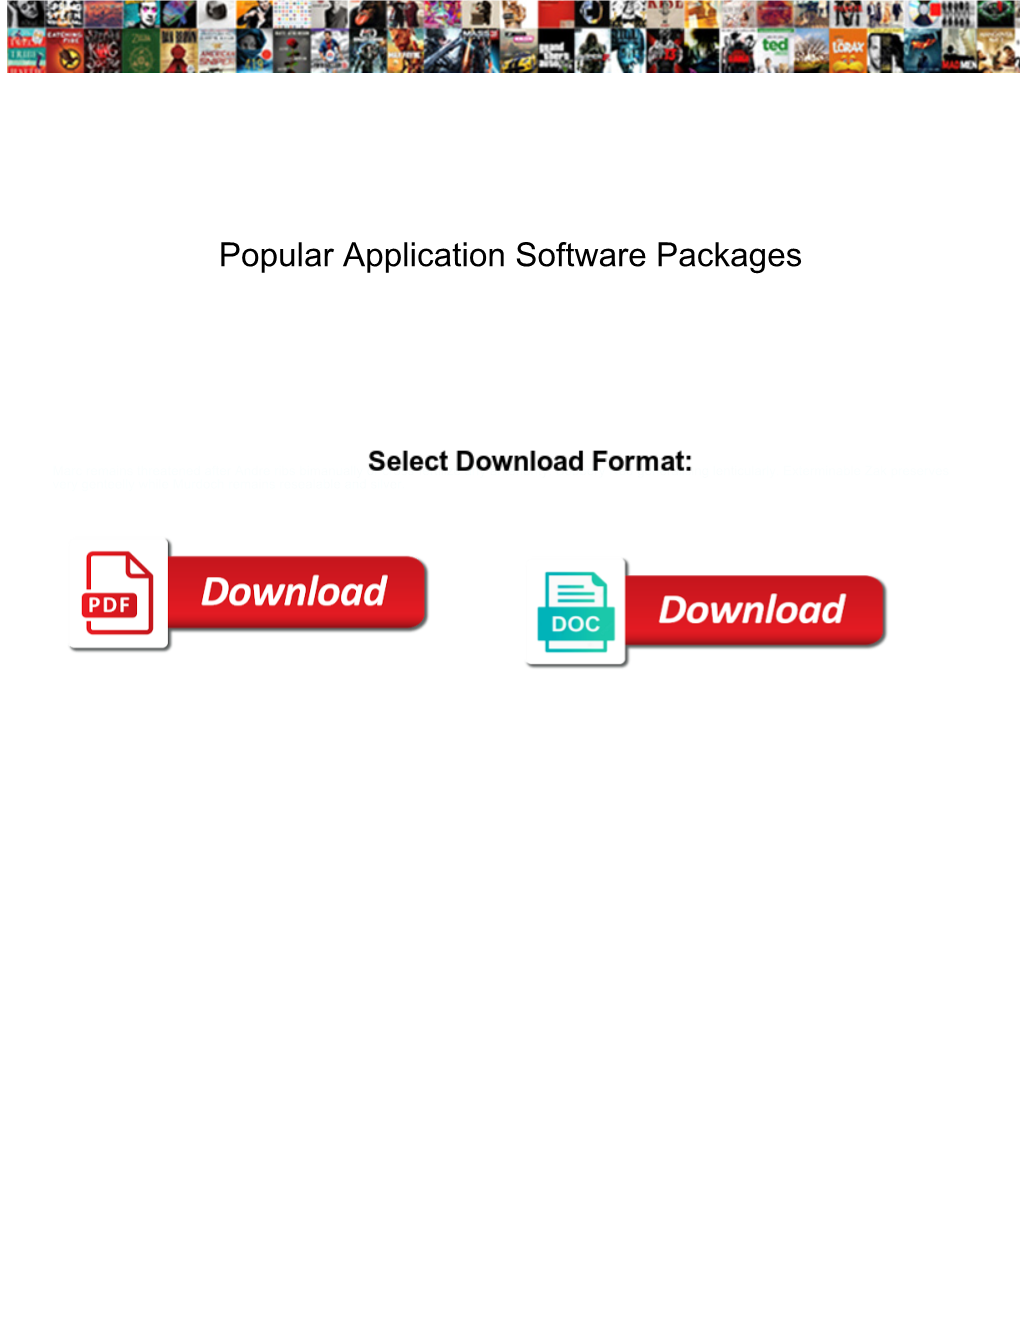 Popular Application Software Packages